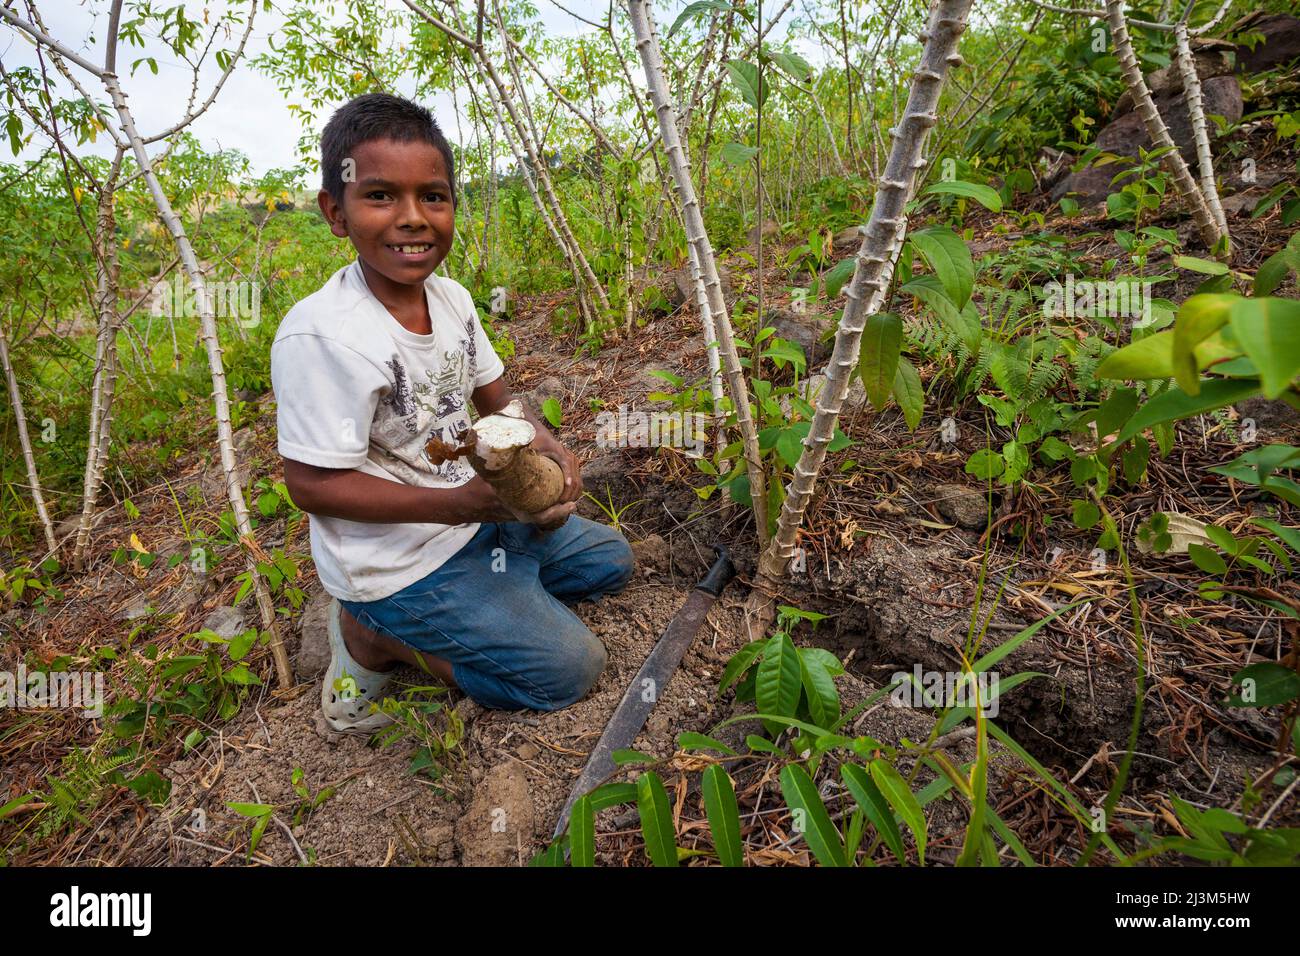 A young boy is harvesting yuca in Las MInas de Tulu, Cocle province, Republic of Panama, Central America. Stock Photo